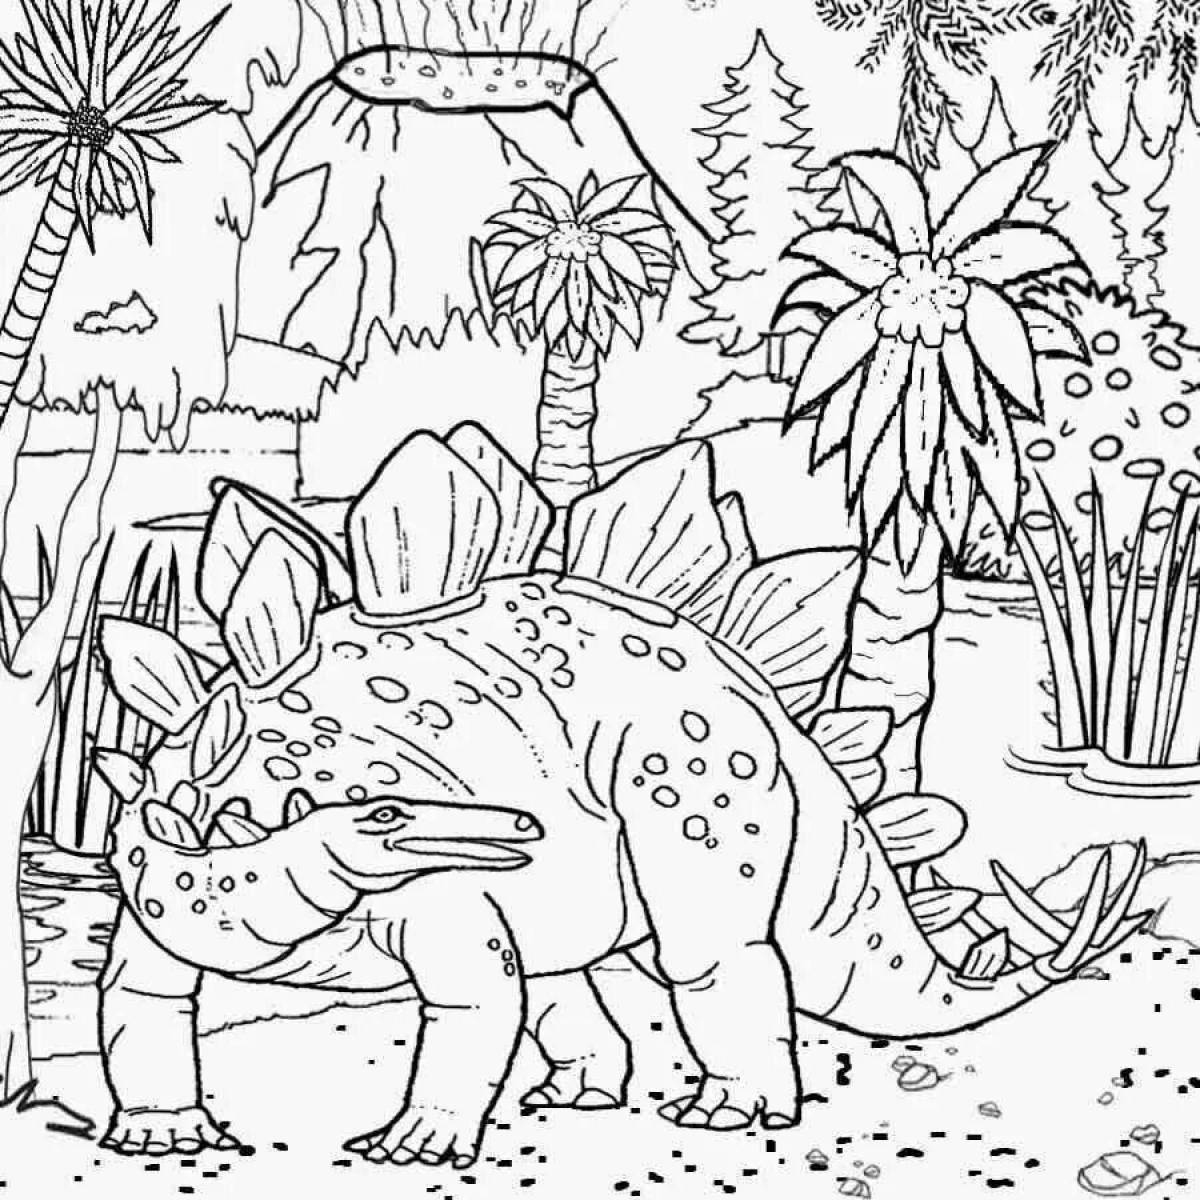 Creative Jurassic Park coloring book for kids